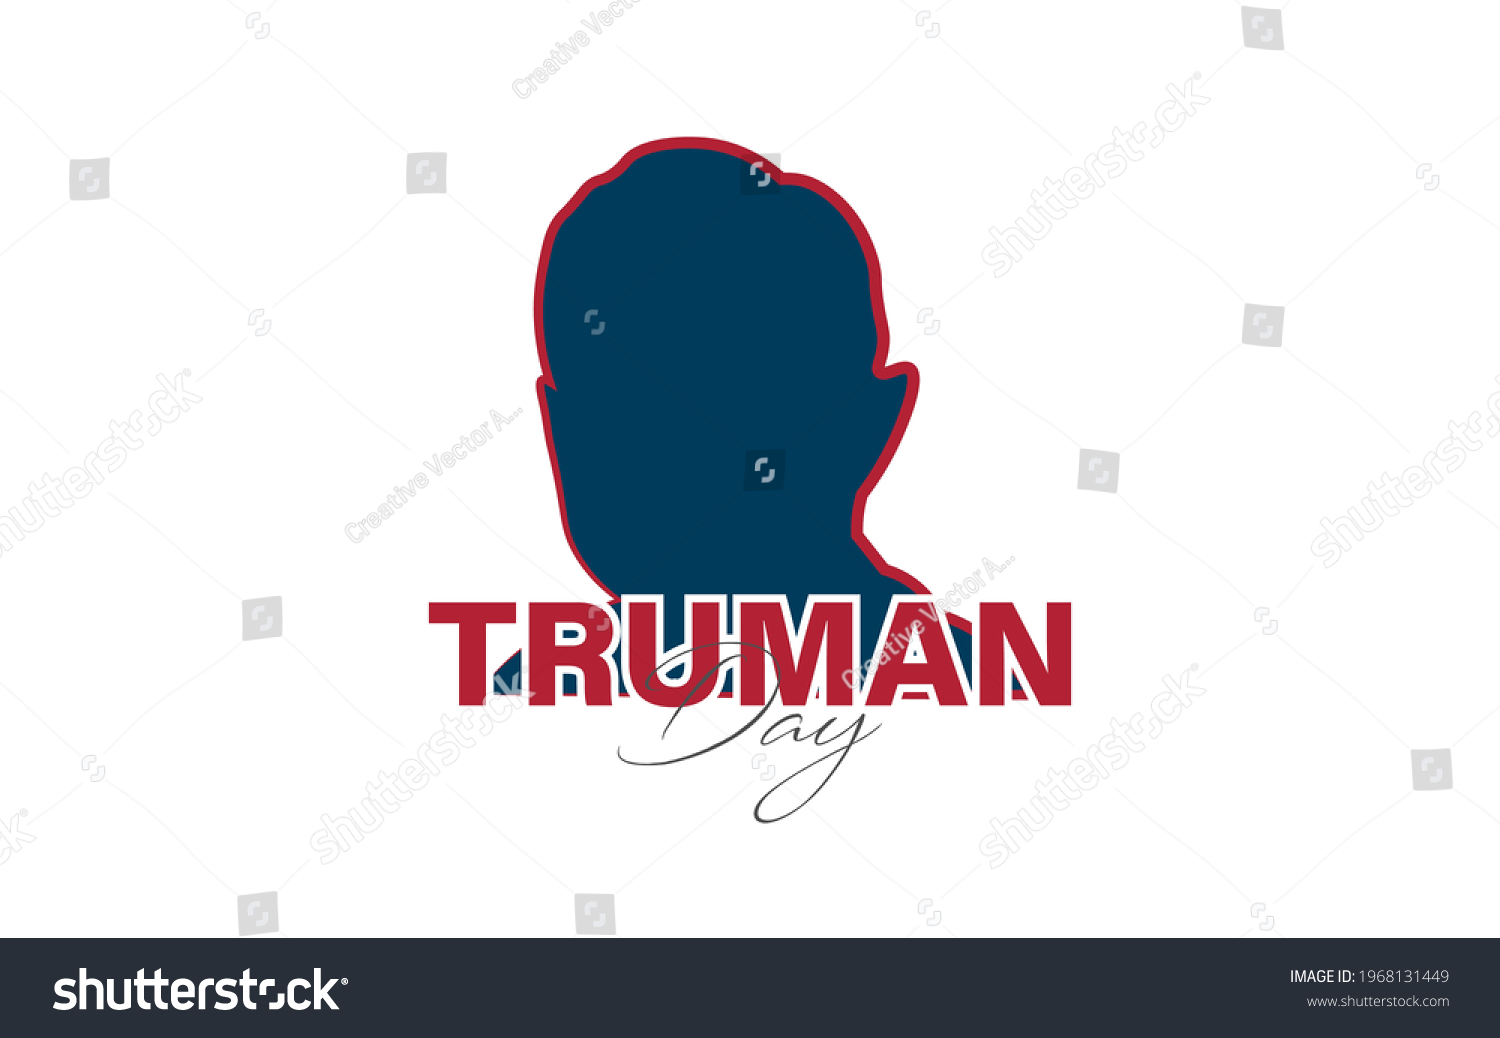 SVG of Vector Illustration of Truman Day. A holiday to celebrate the birth of Harry S. Truman. svg